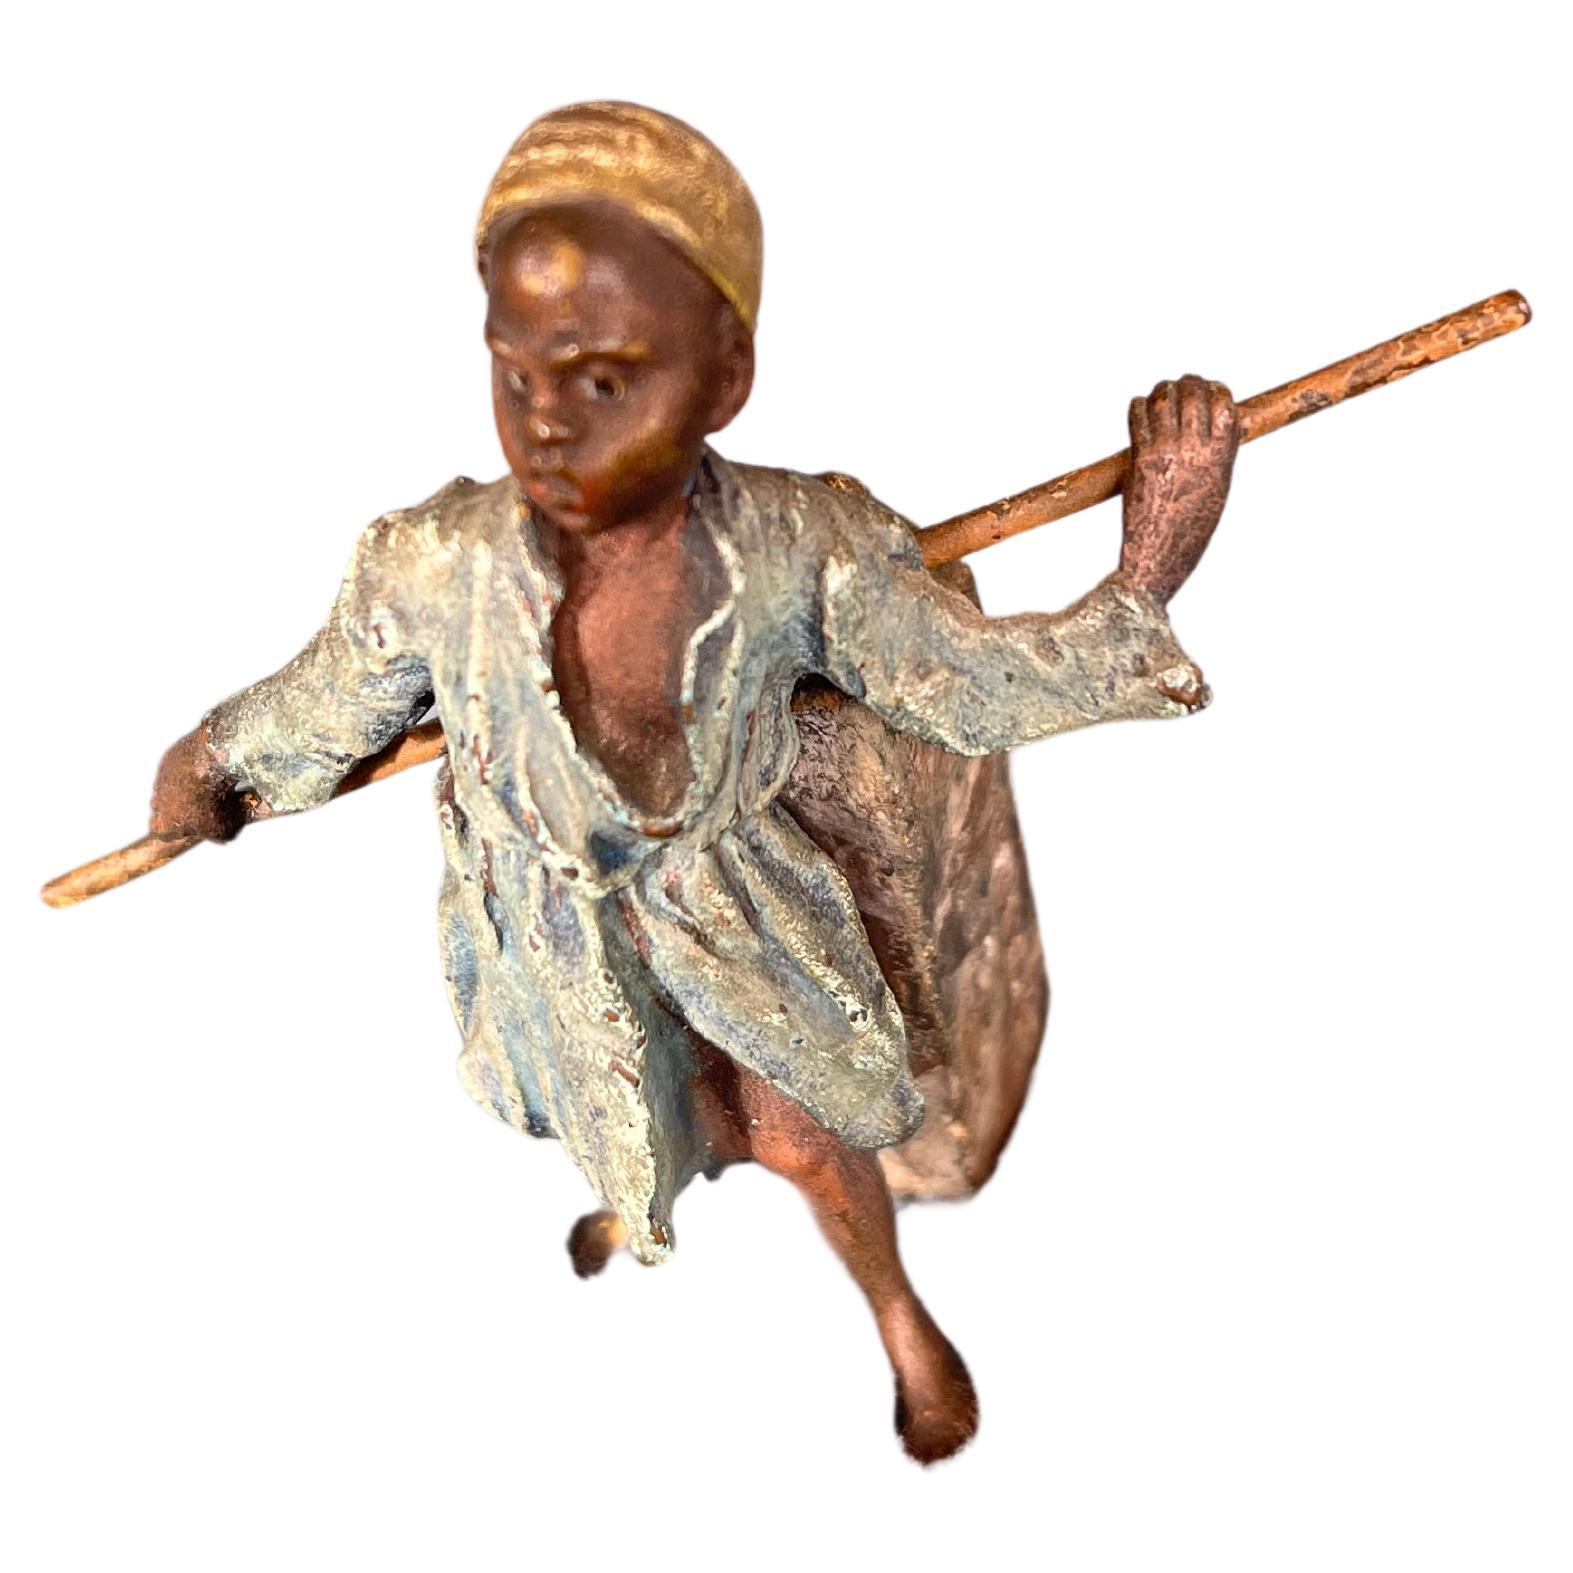 Orientalist Cold Painted Bronze Figure of a Young Boy, attr. Bergmann Foundry